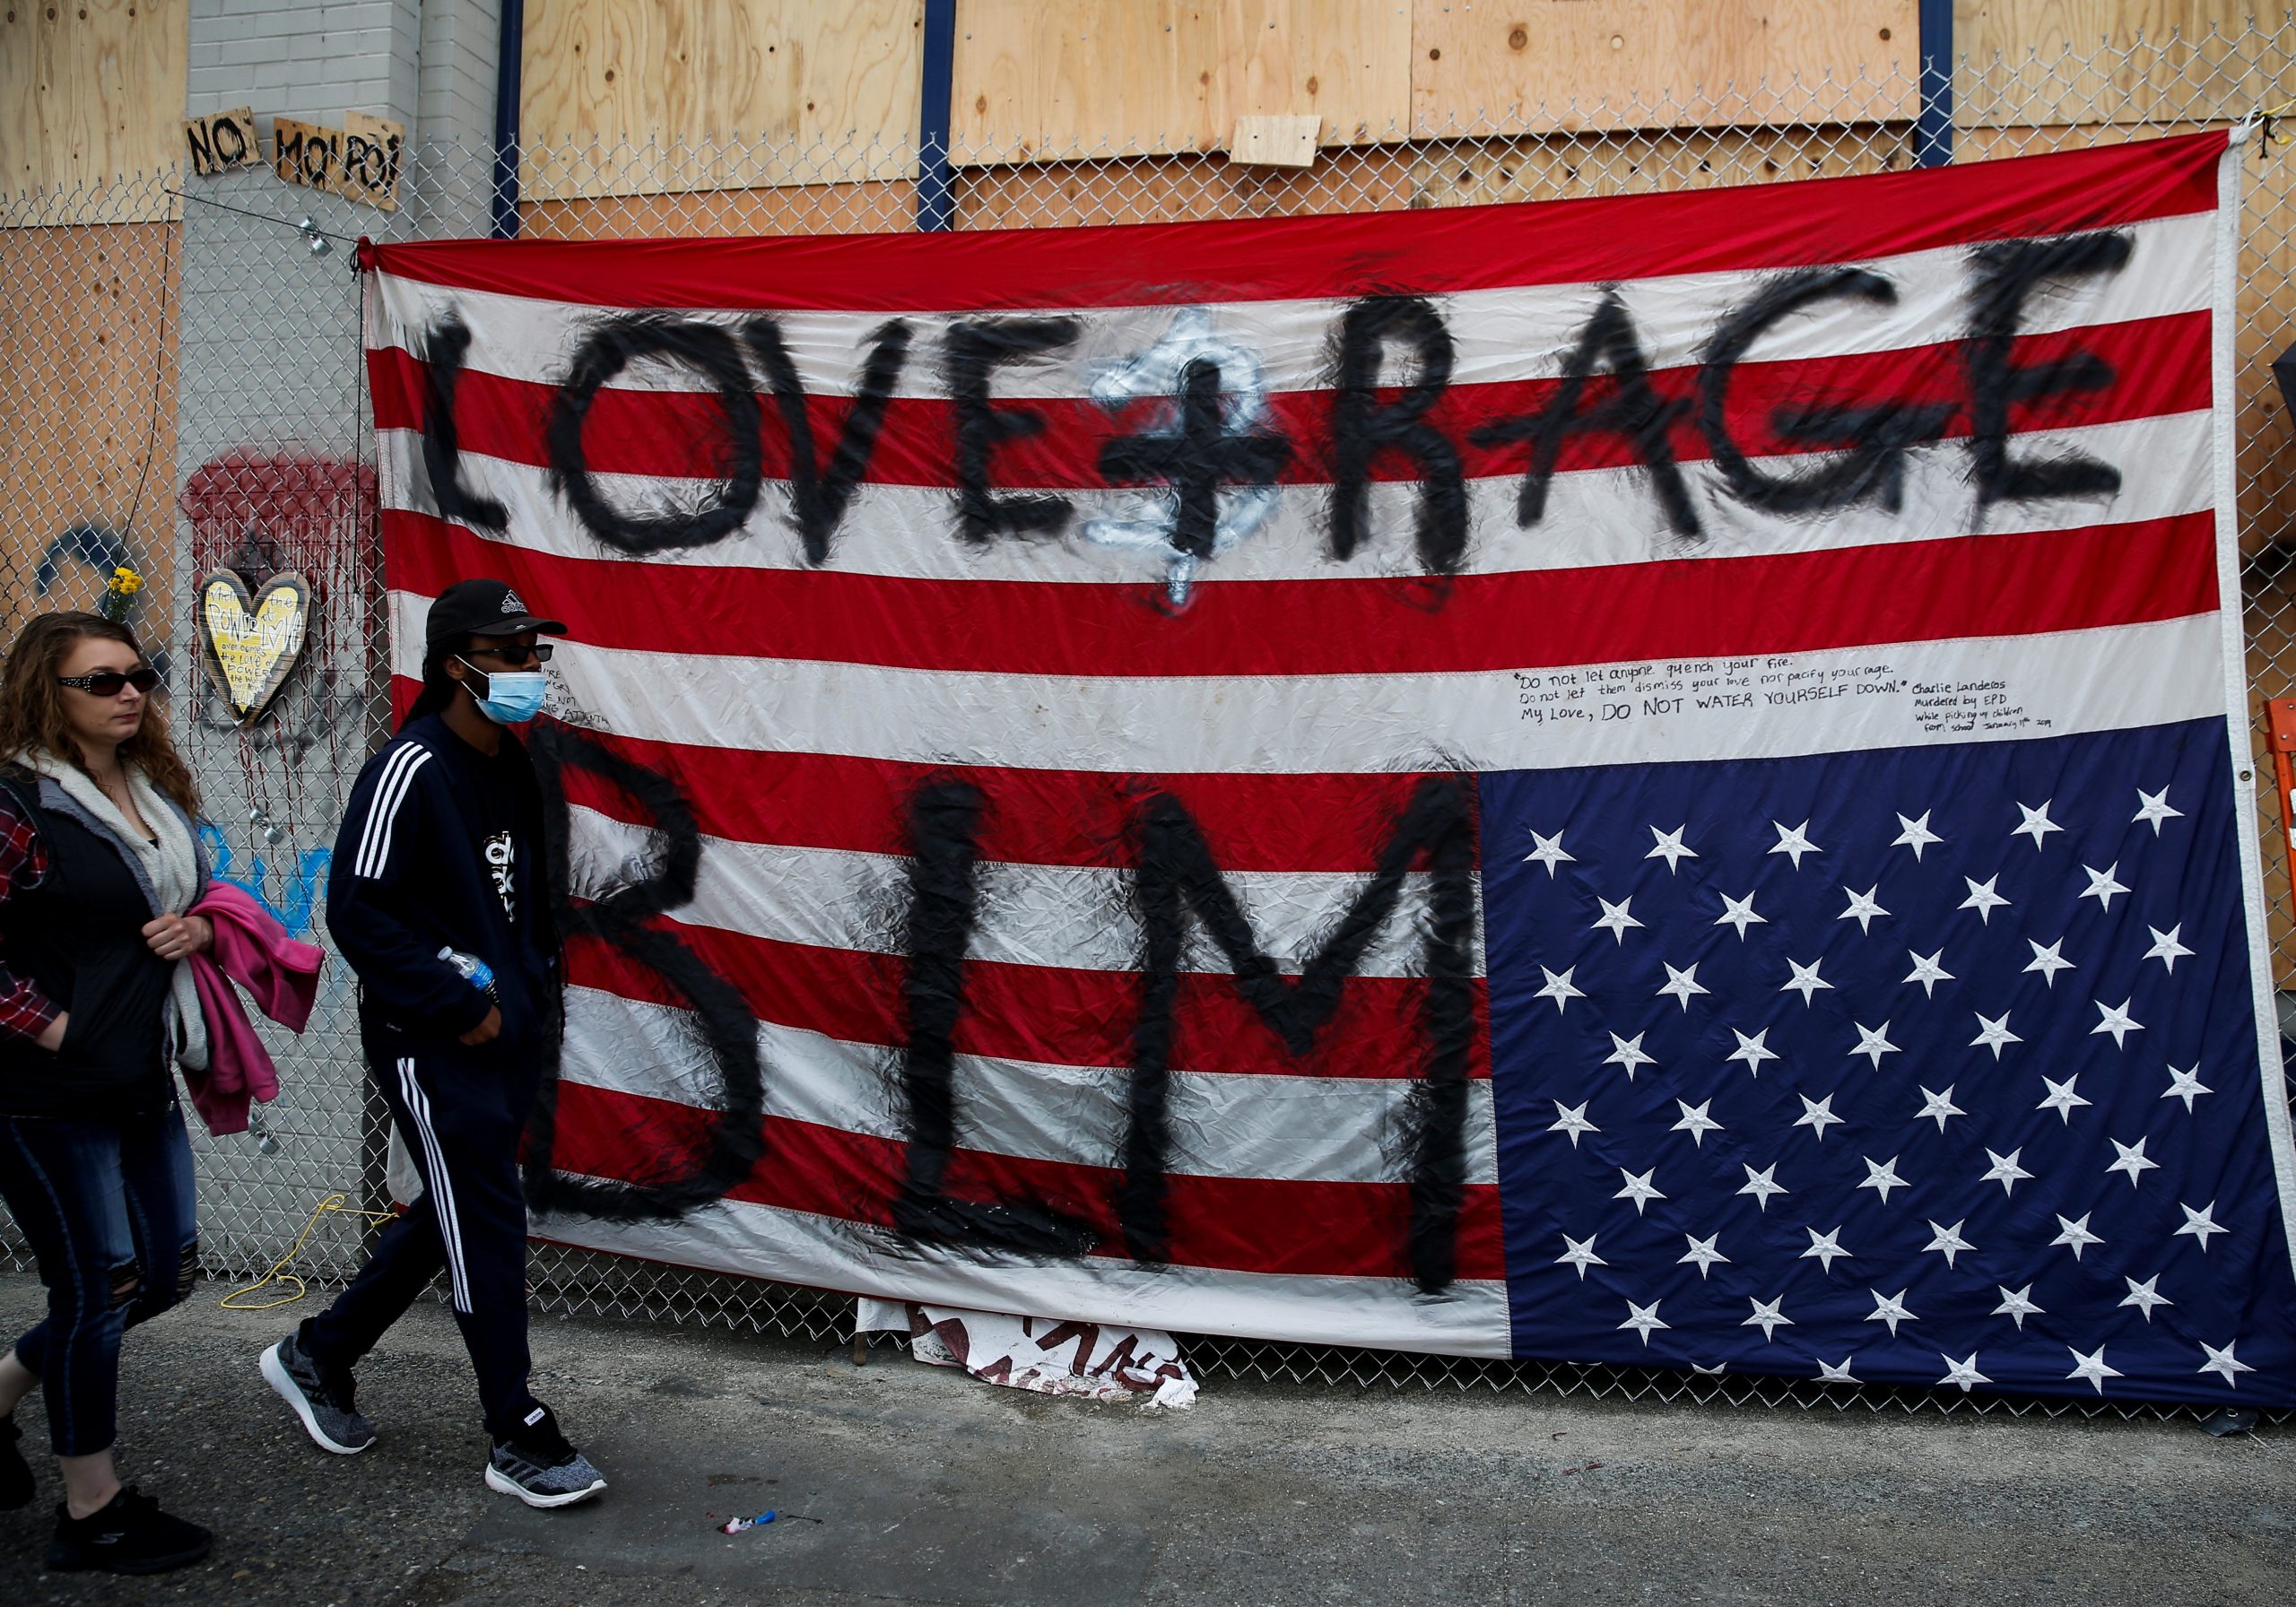 People protest at the CHAZ/CHOP zone around Seattle Police Department's East Precinct against racial inequality in the aftermath of the death in Minneapolis police custody of George Floyd, in Seattle People walk past an upside down American flag taped to the fence outside the Seattle Police Department's East Precinct at the self-proclaimed CHAZ/CHOP zone as people continue to protest against racial inequality in the aftermath of the death in Minneapolis police custody of George Floyd, in Seattle, Washington, U.S., June 14, 2020. REUTERS/Lindsey Wasson LINDSEY WASSON